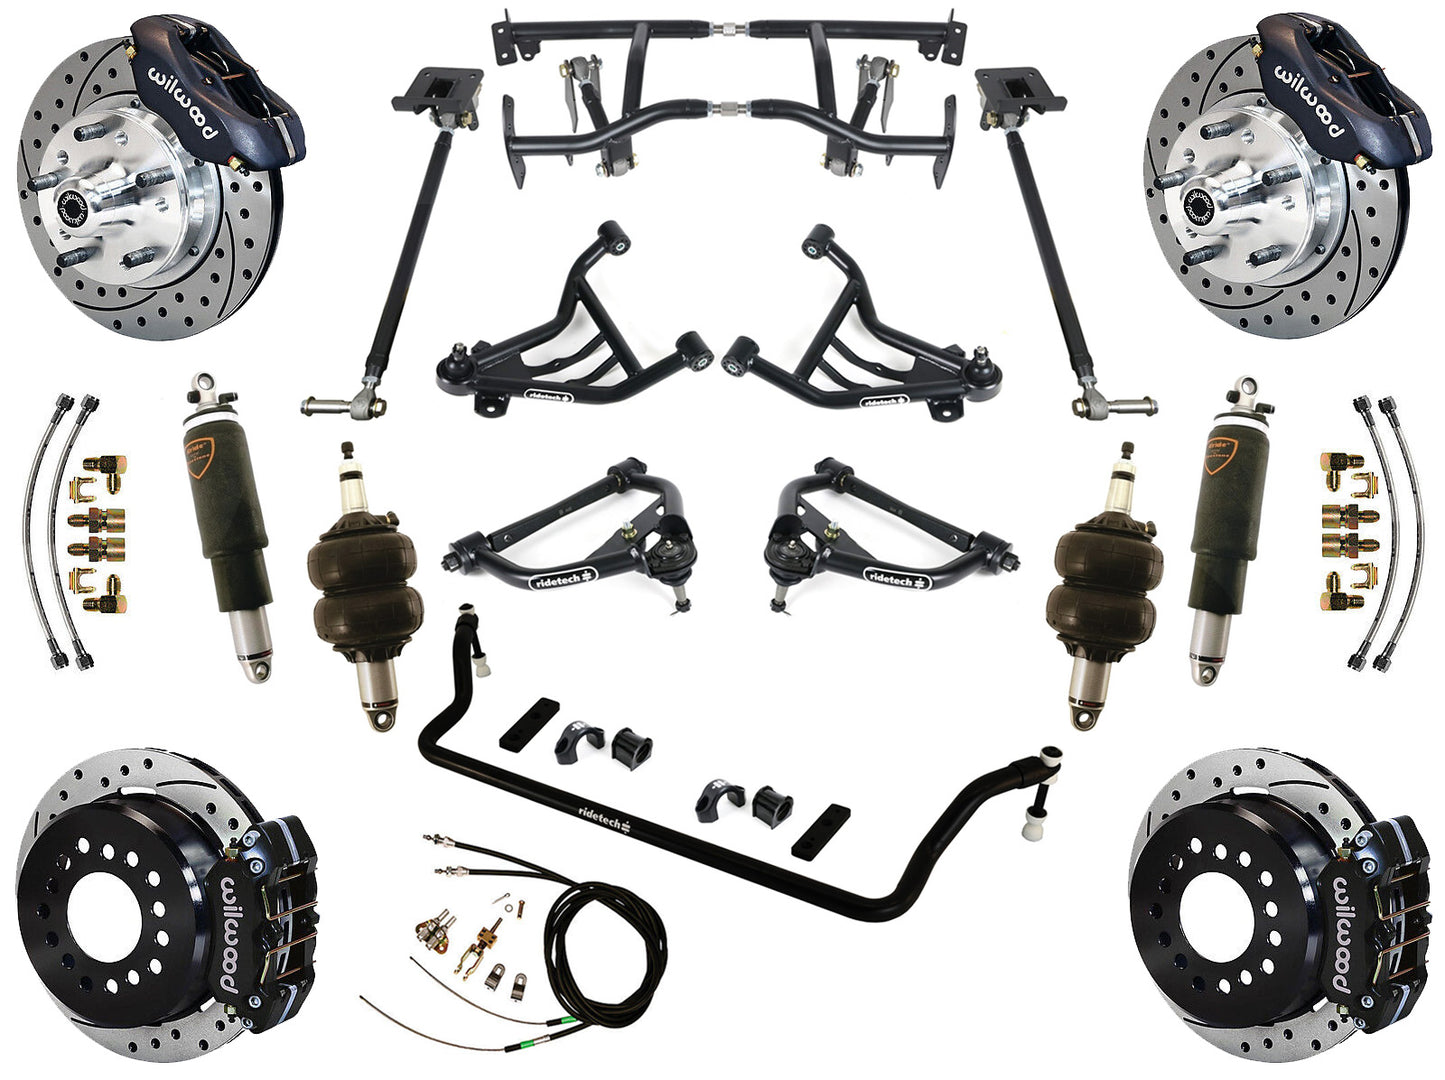 AIR RIDE & 4-LINK SYSTEM,WILWOOD 11" DRILL BRAKES,BLACK CALIPERS,70-81 GM F-BODY